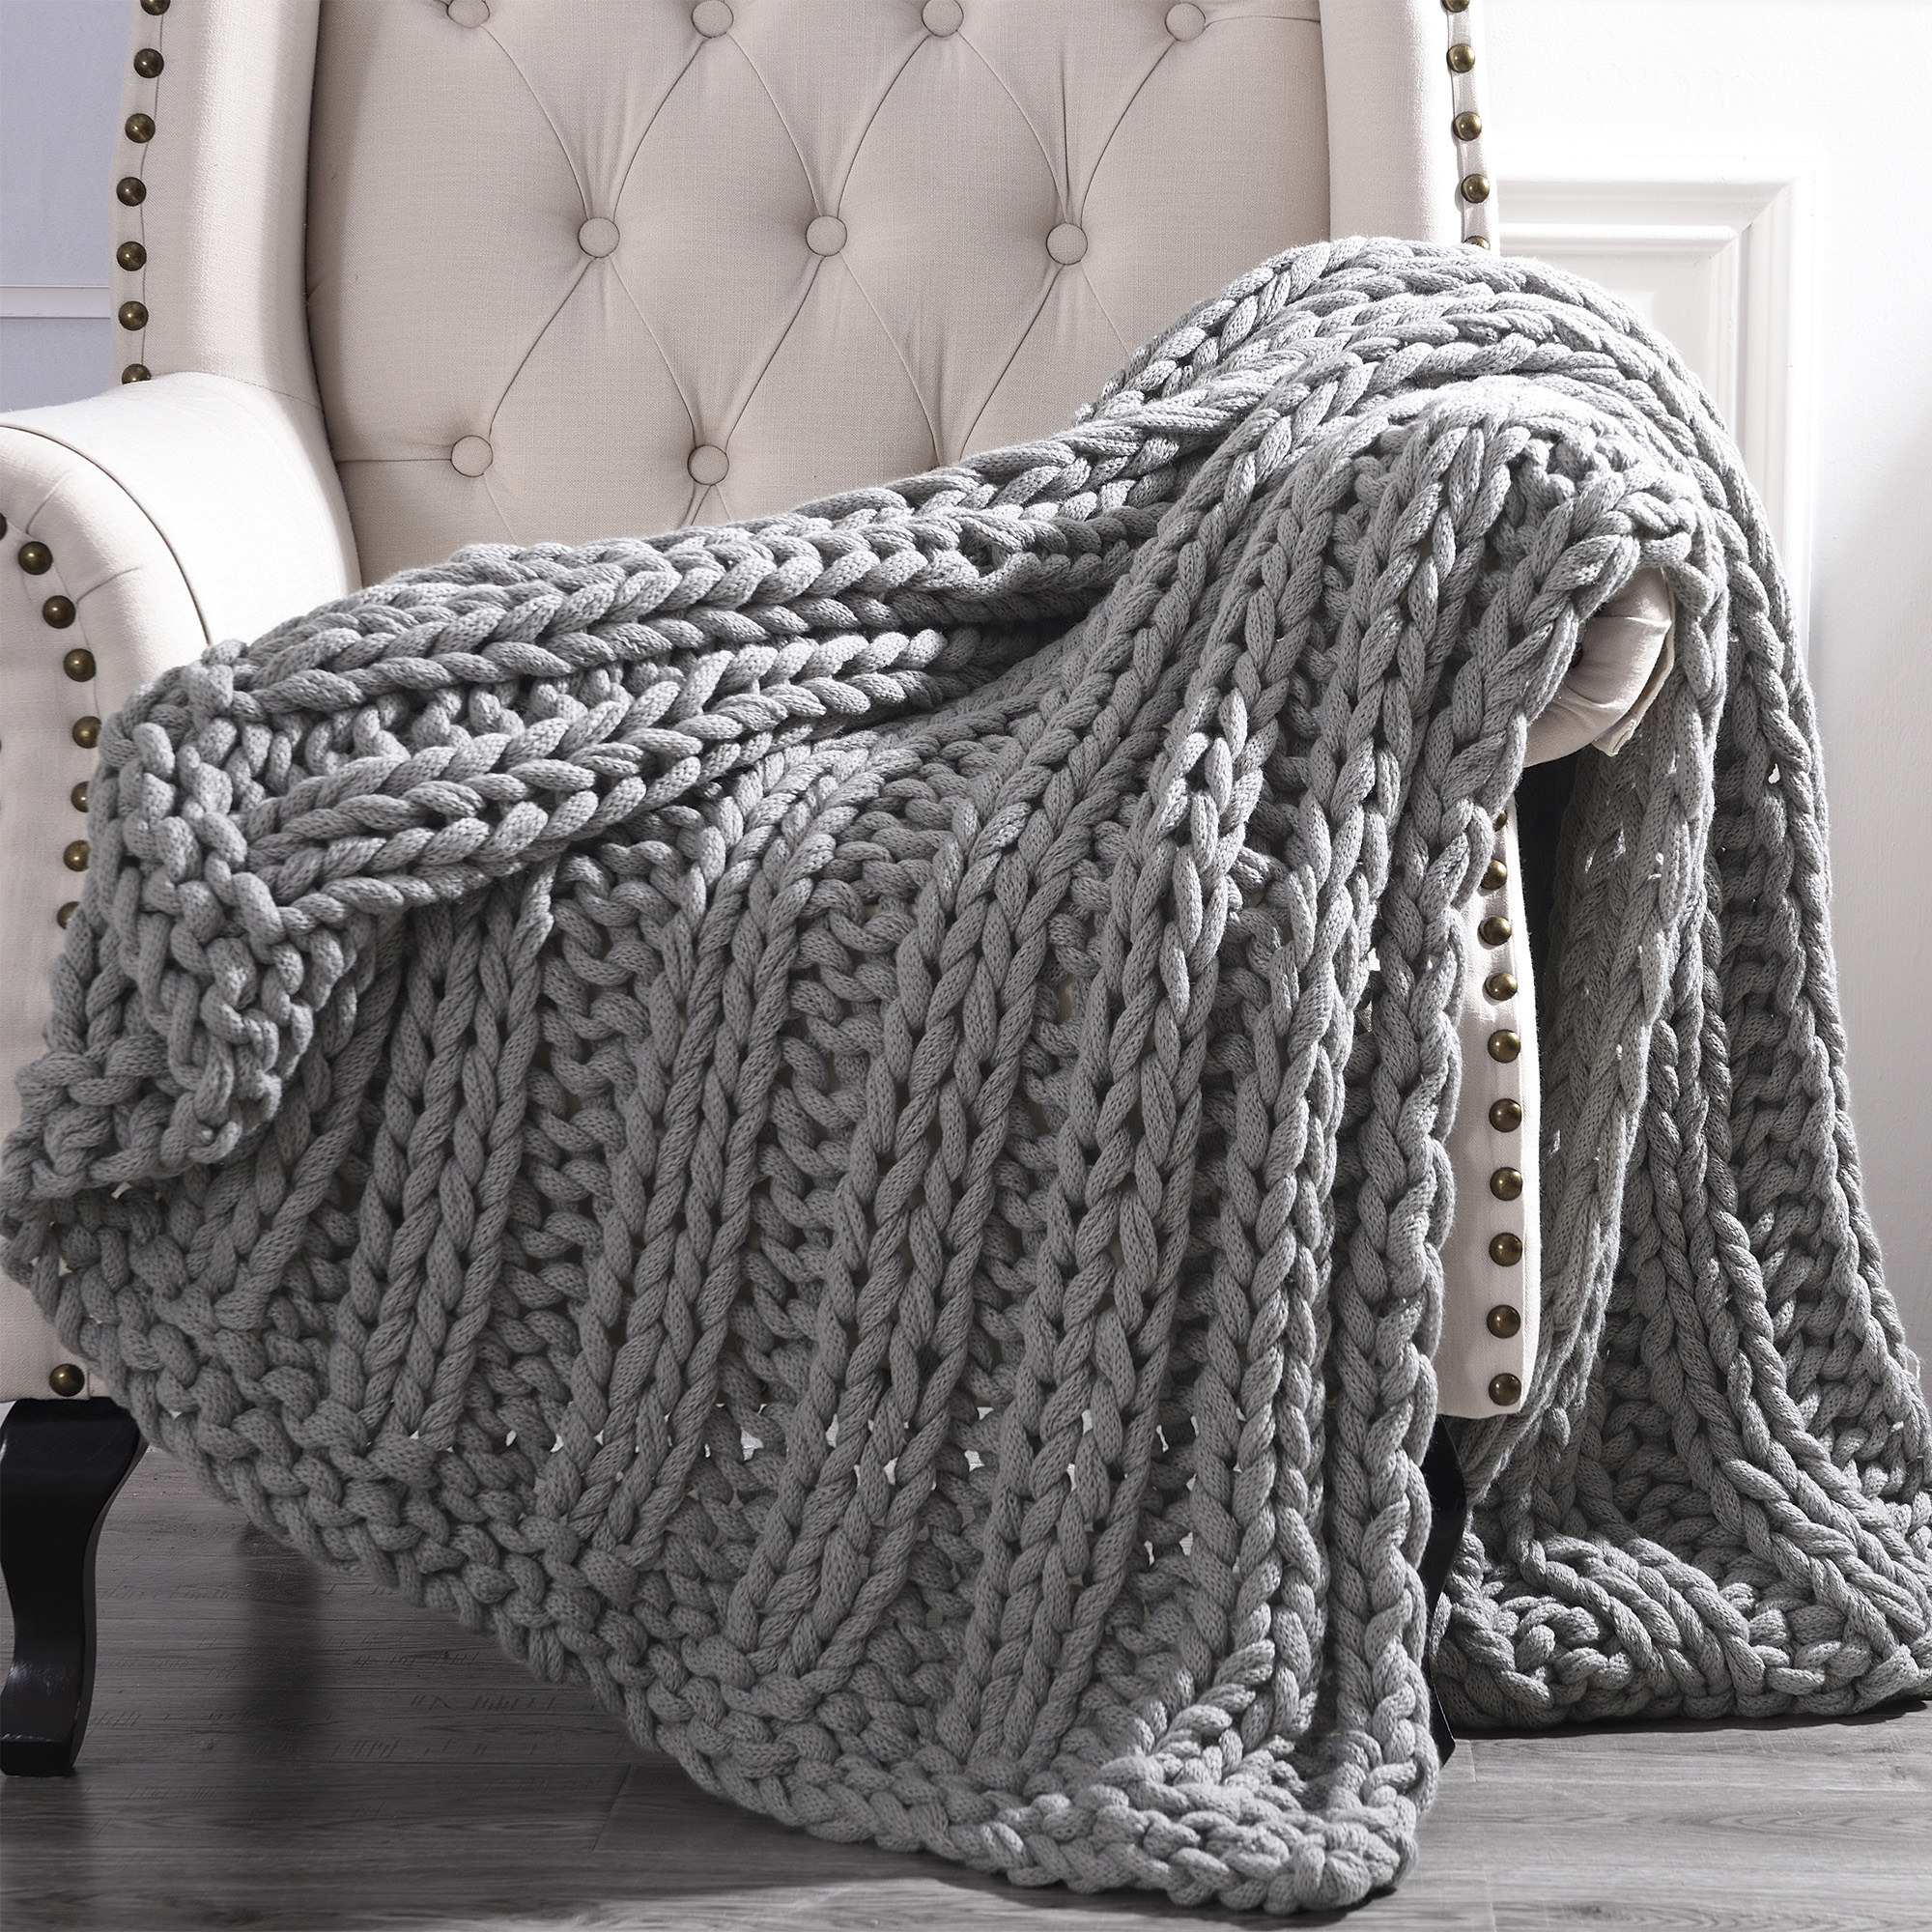 Chunky gray knitted blanket draped over a chair.